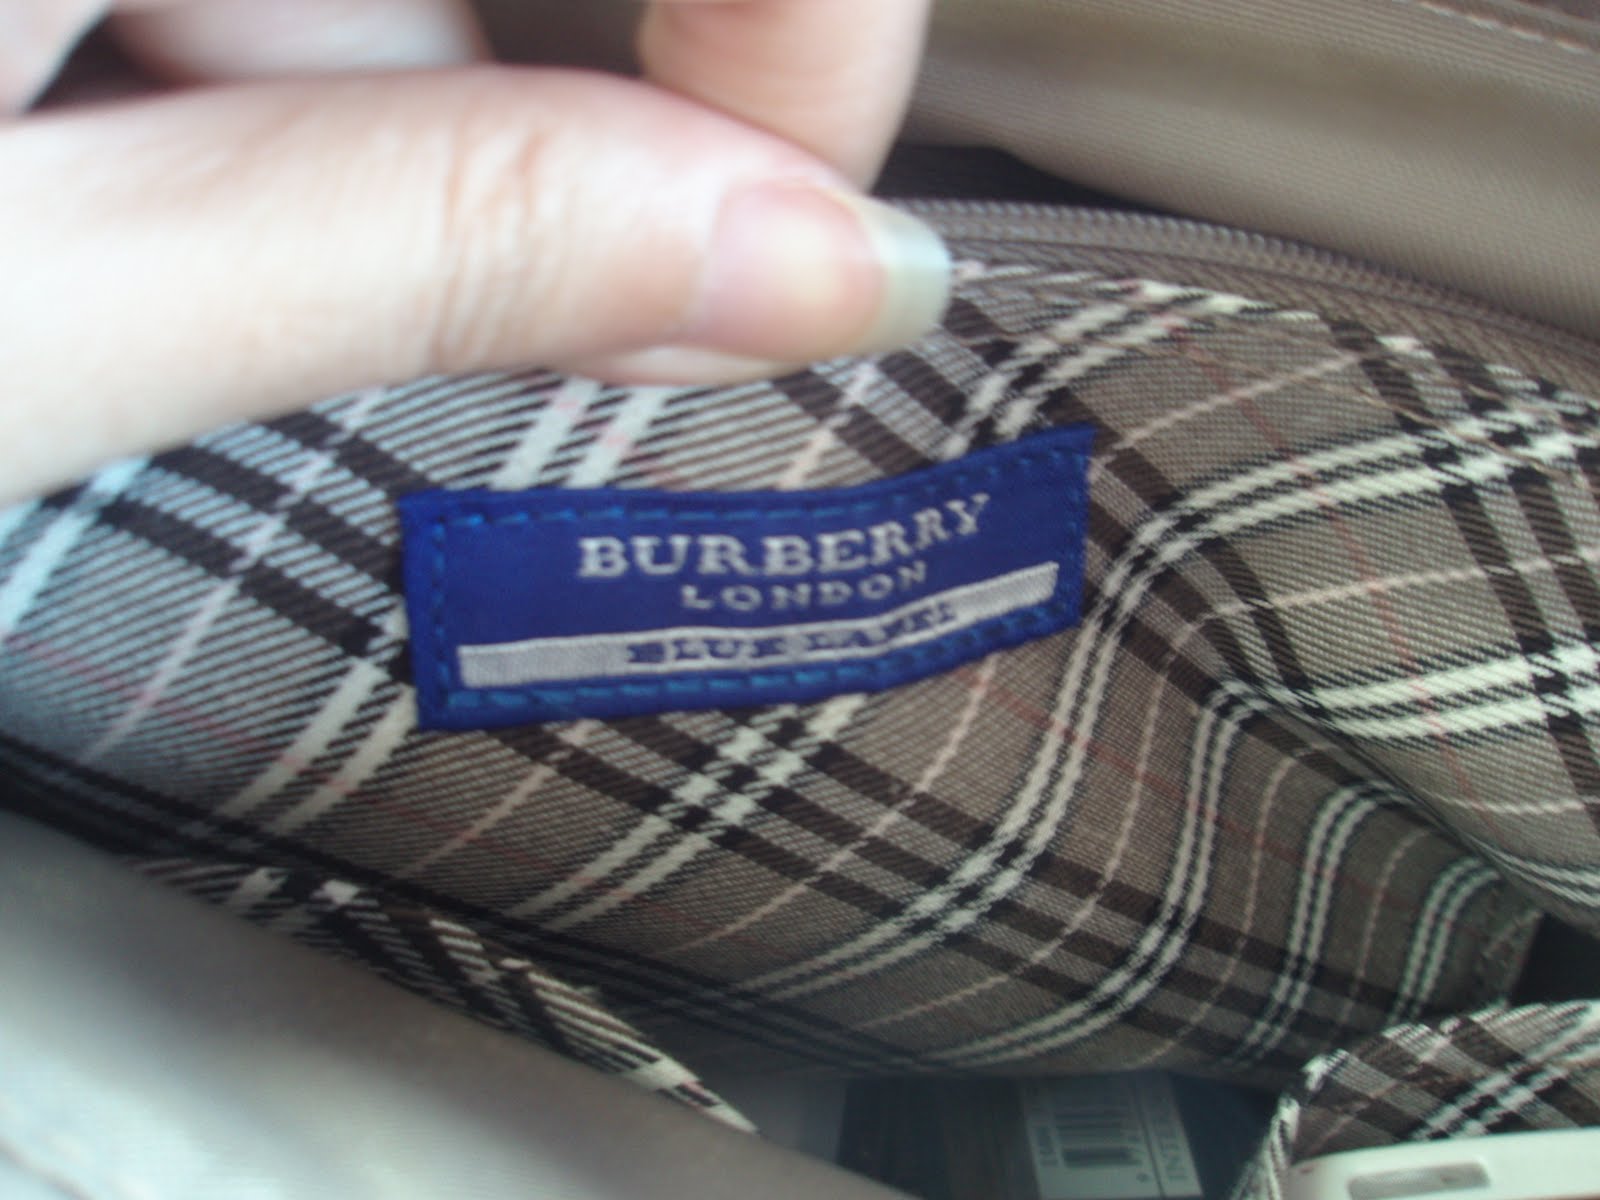 my 1st burberry blue label: BURBERRY BLUE LABEL FROM DARLING